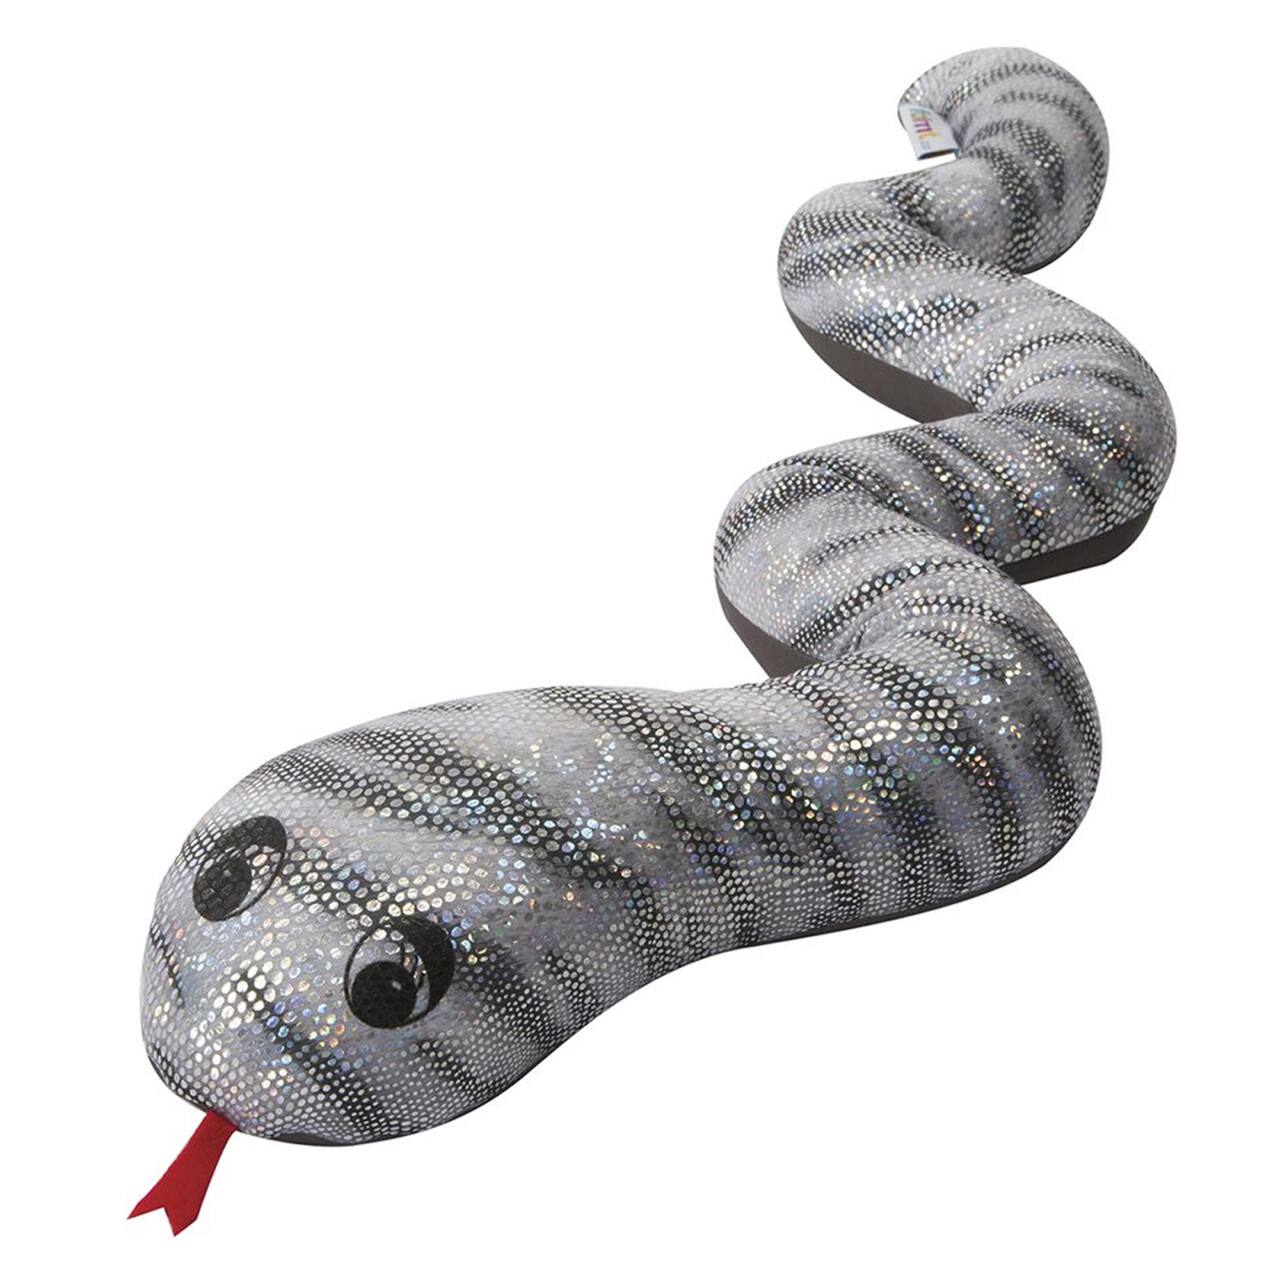 Manimo&#xAE; Silver Weighted Snake, 3.5lb.